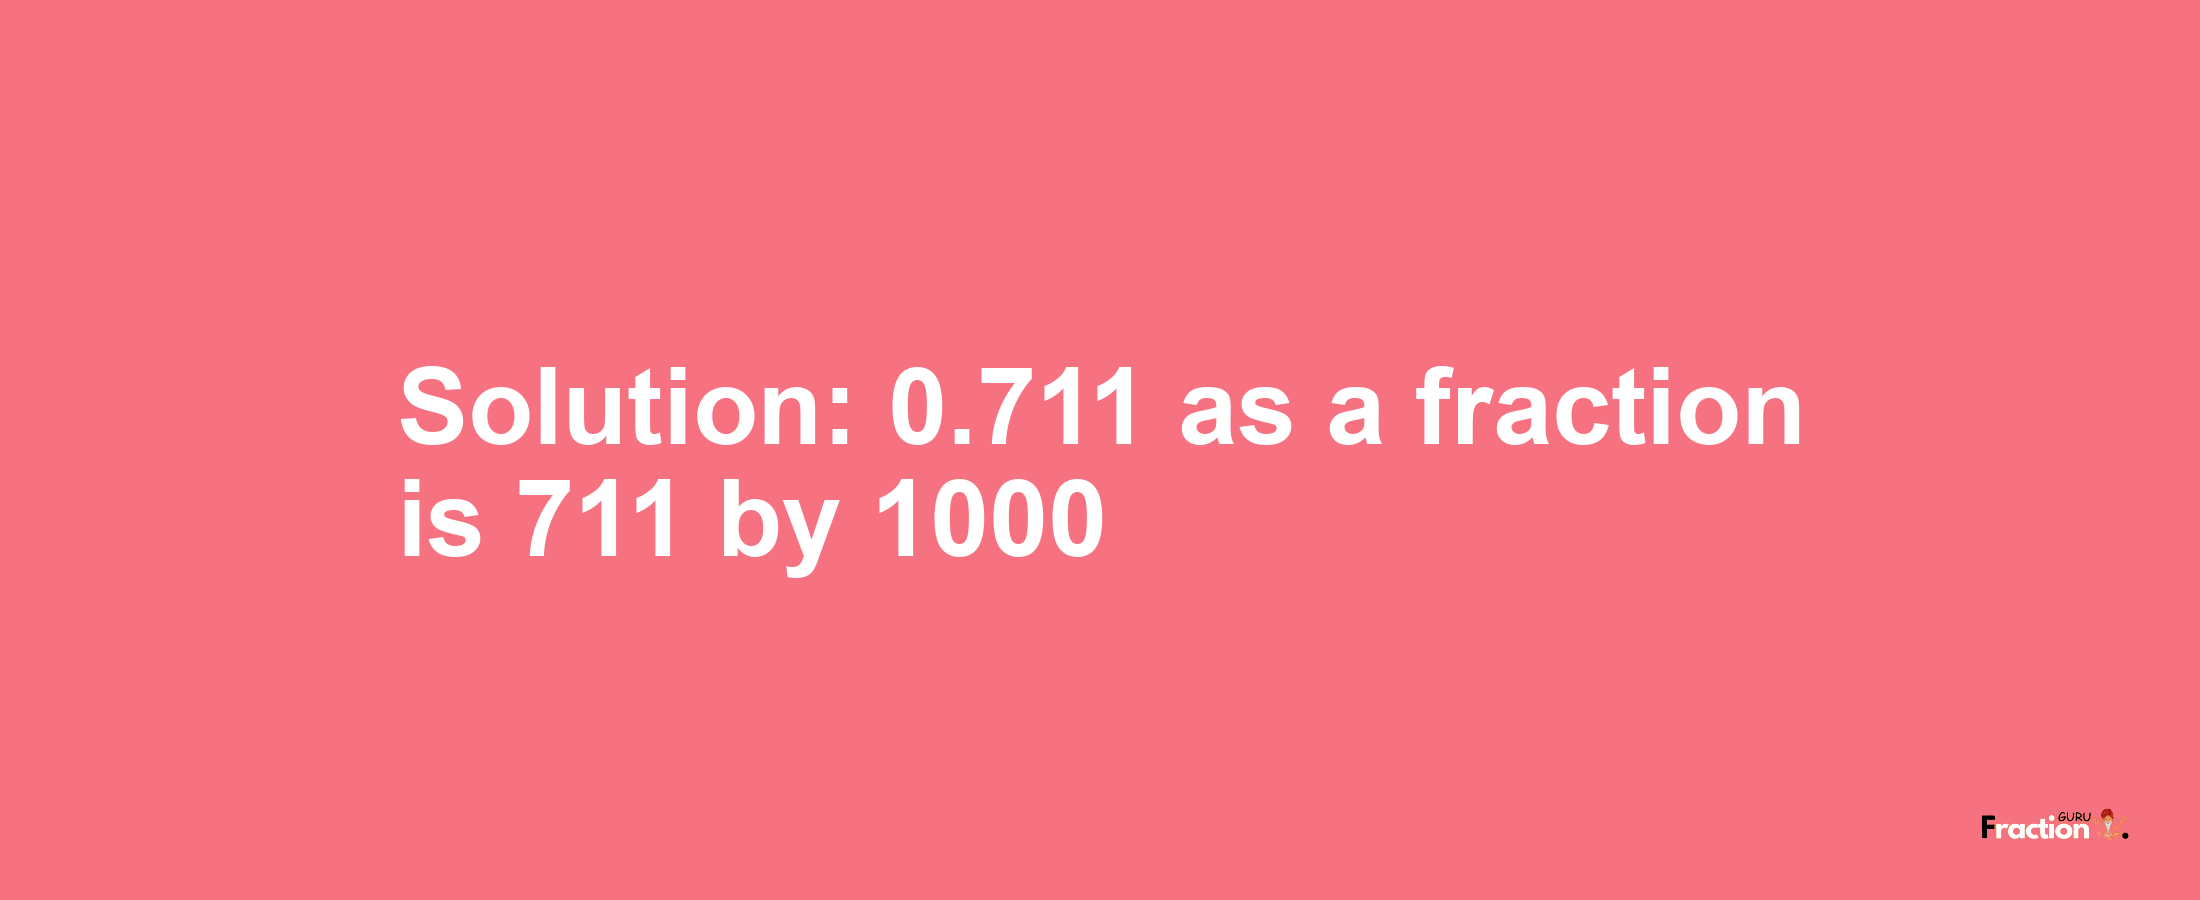 Solution:0.711 as a fraction is 711/1000